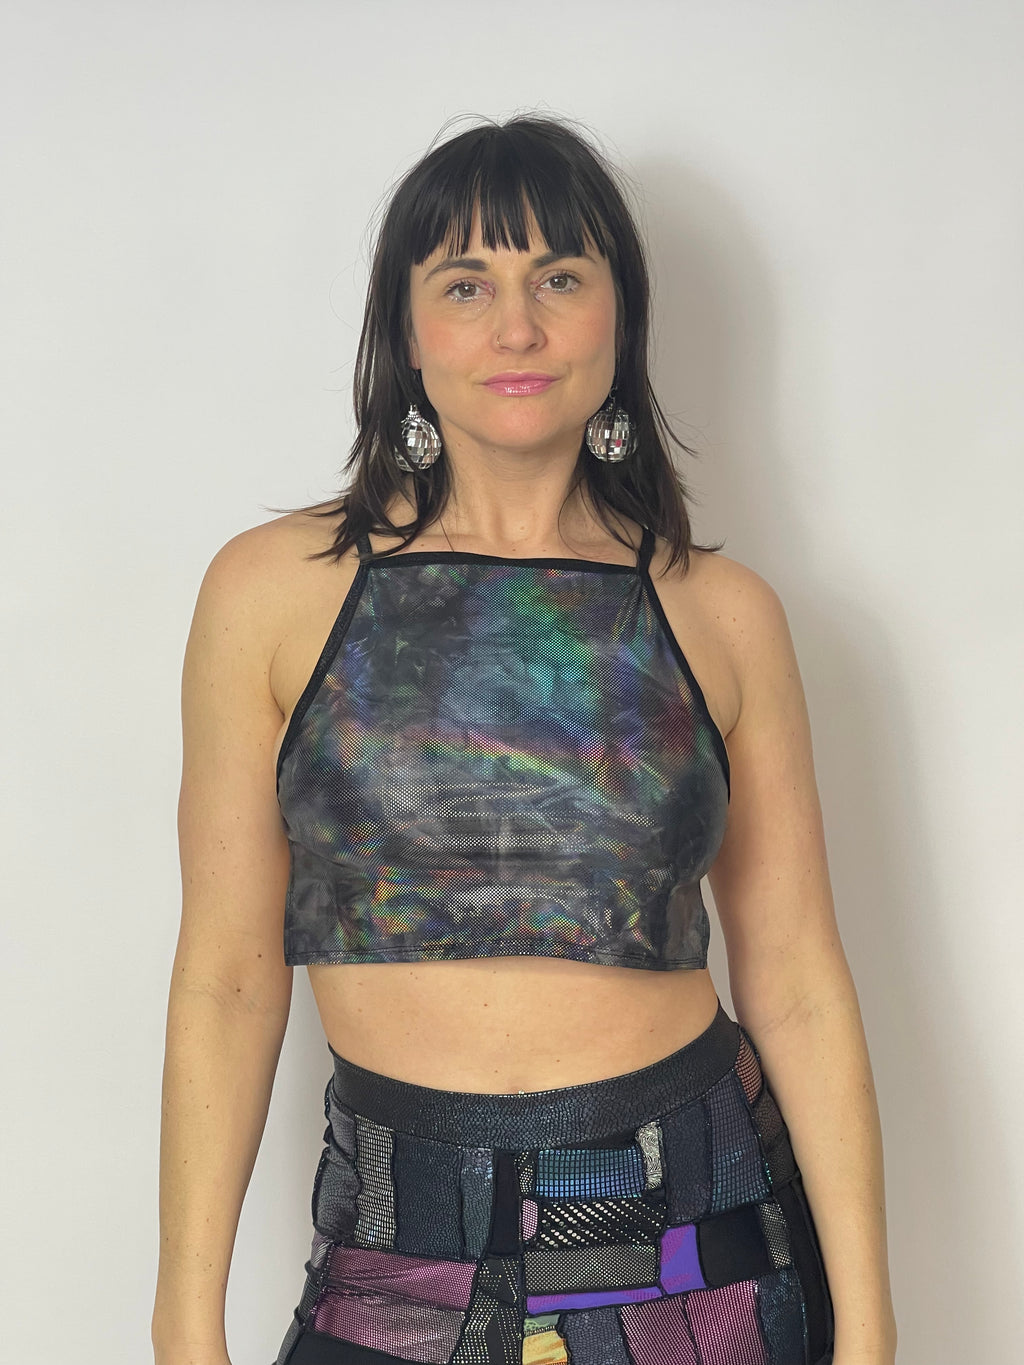 holografische top, holographic top, festival top, milkshake top, festival look, festival outfit, top met blote rug, party top, rave top